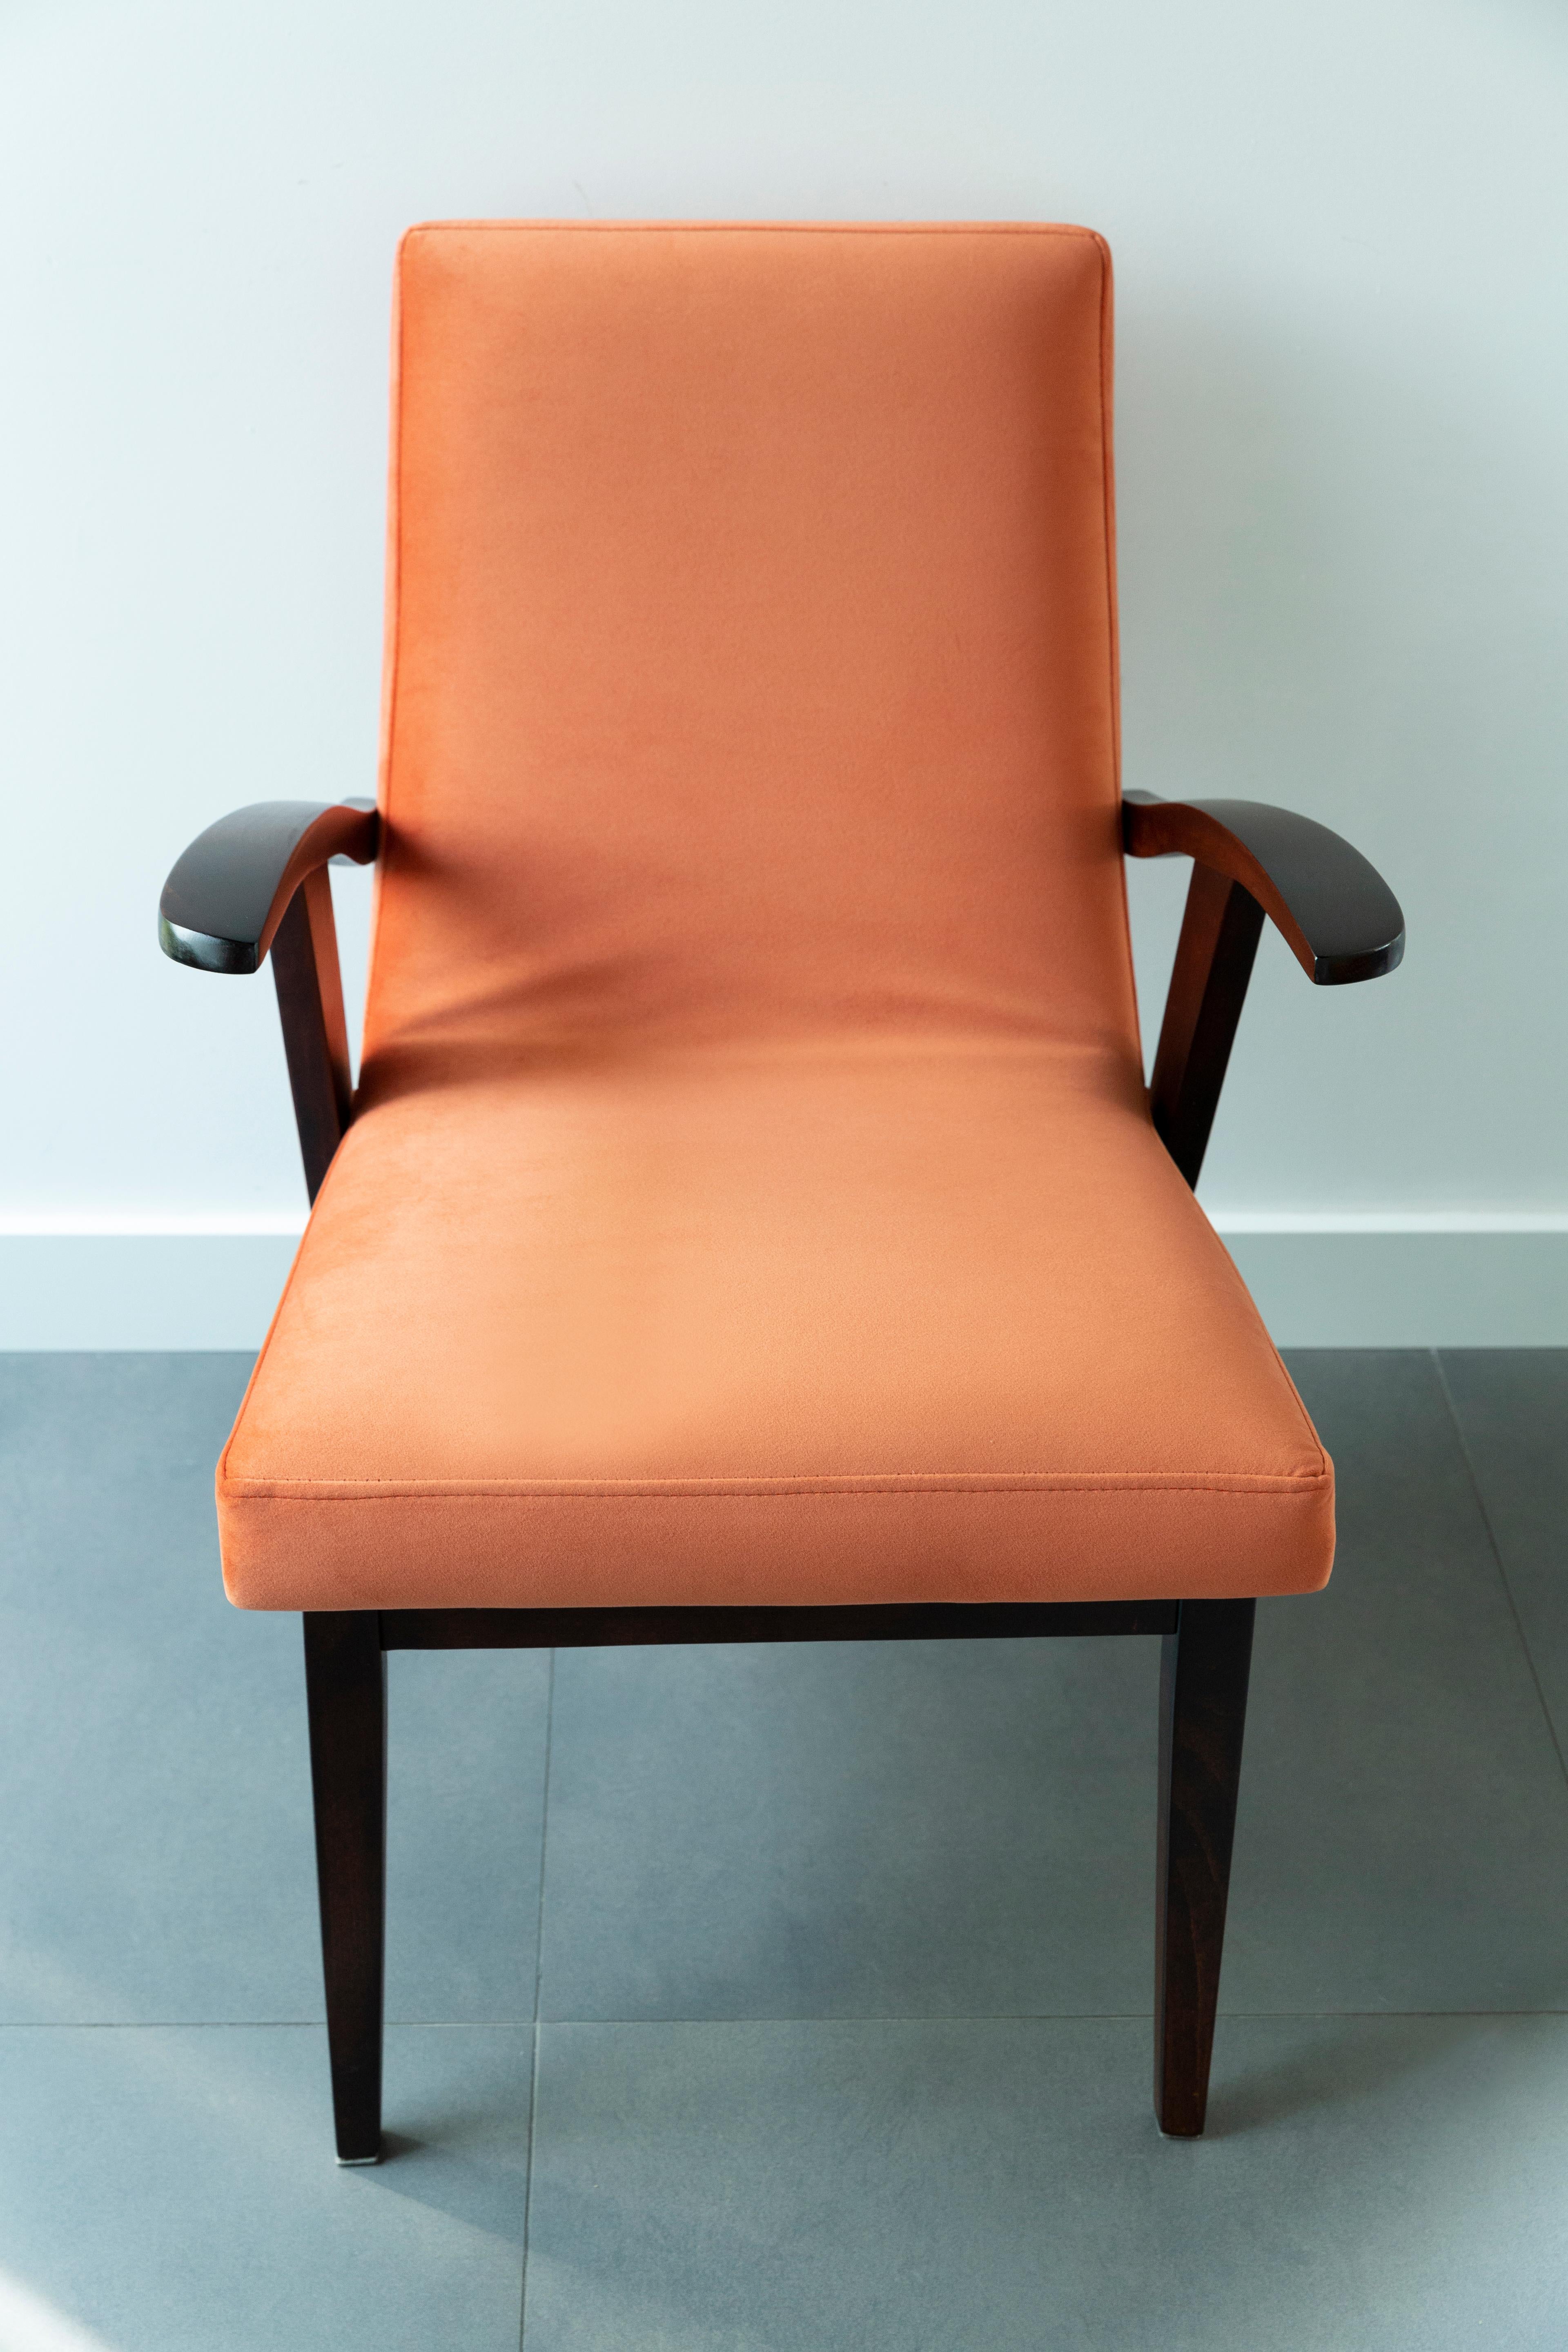 Set of Four Vintage Chairs in Orange Velvet by Mieczyslaw Puchala, 1960s For Sale 2